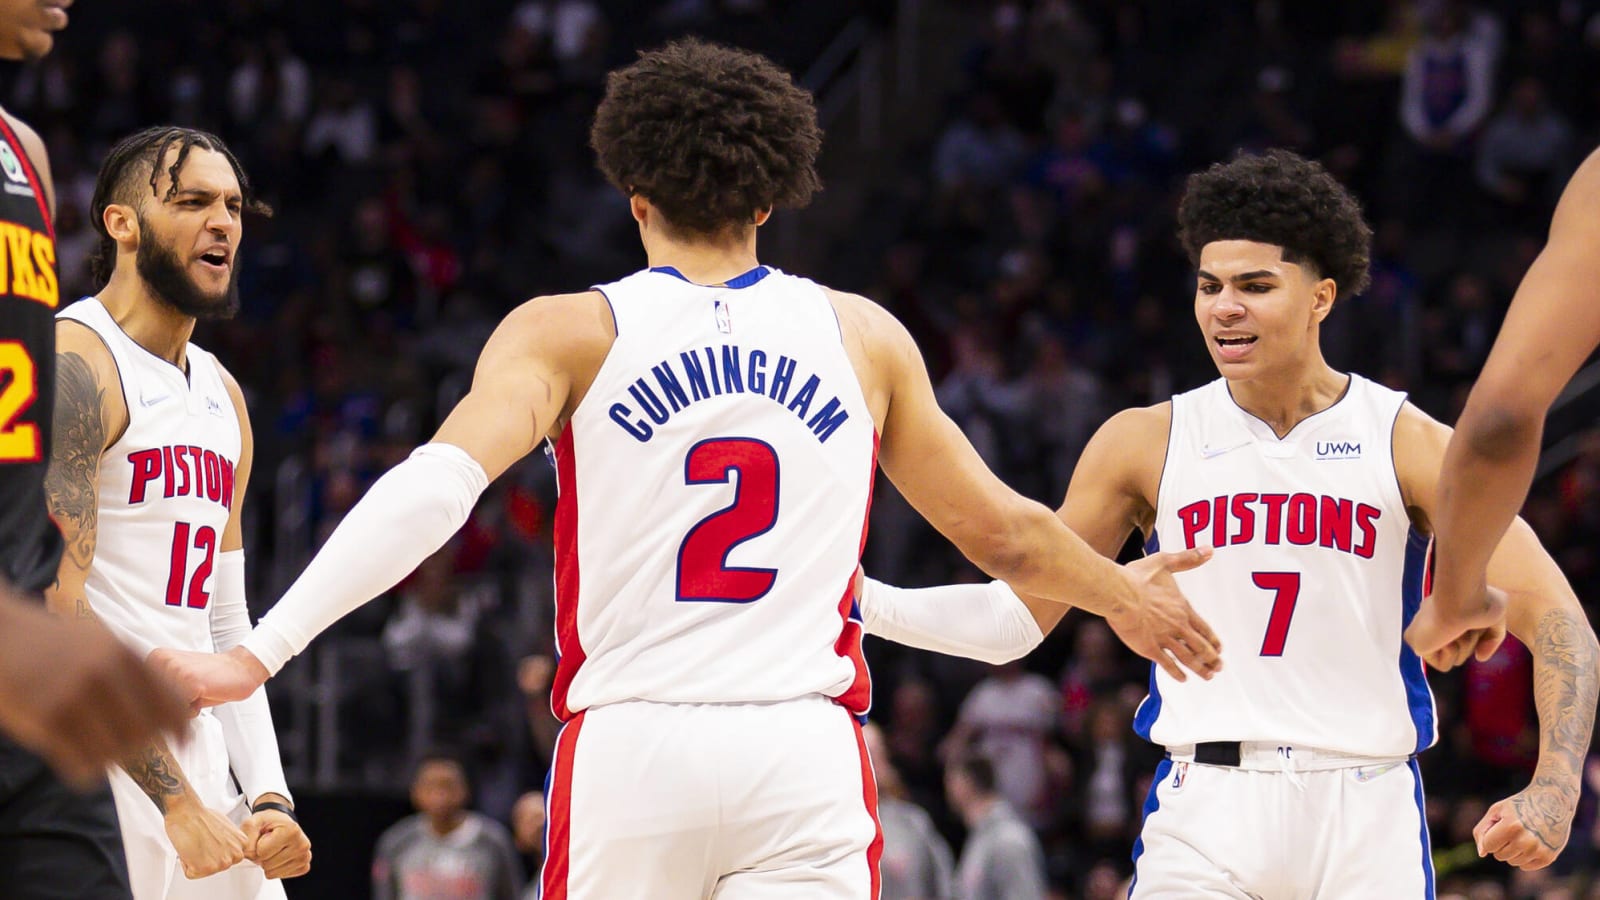 Pistons put together first three-game win streak in three years